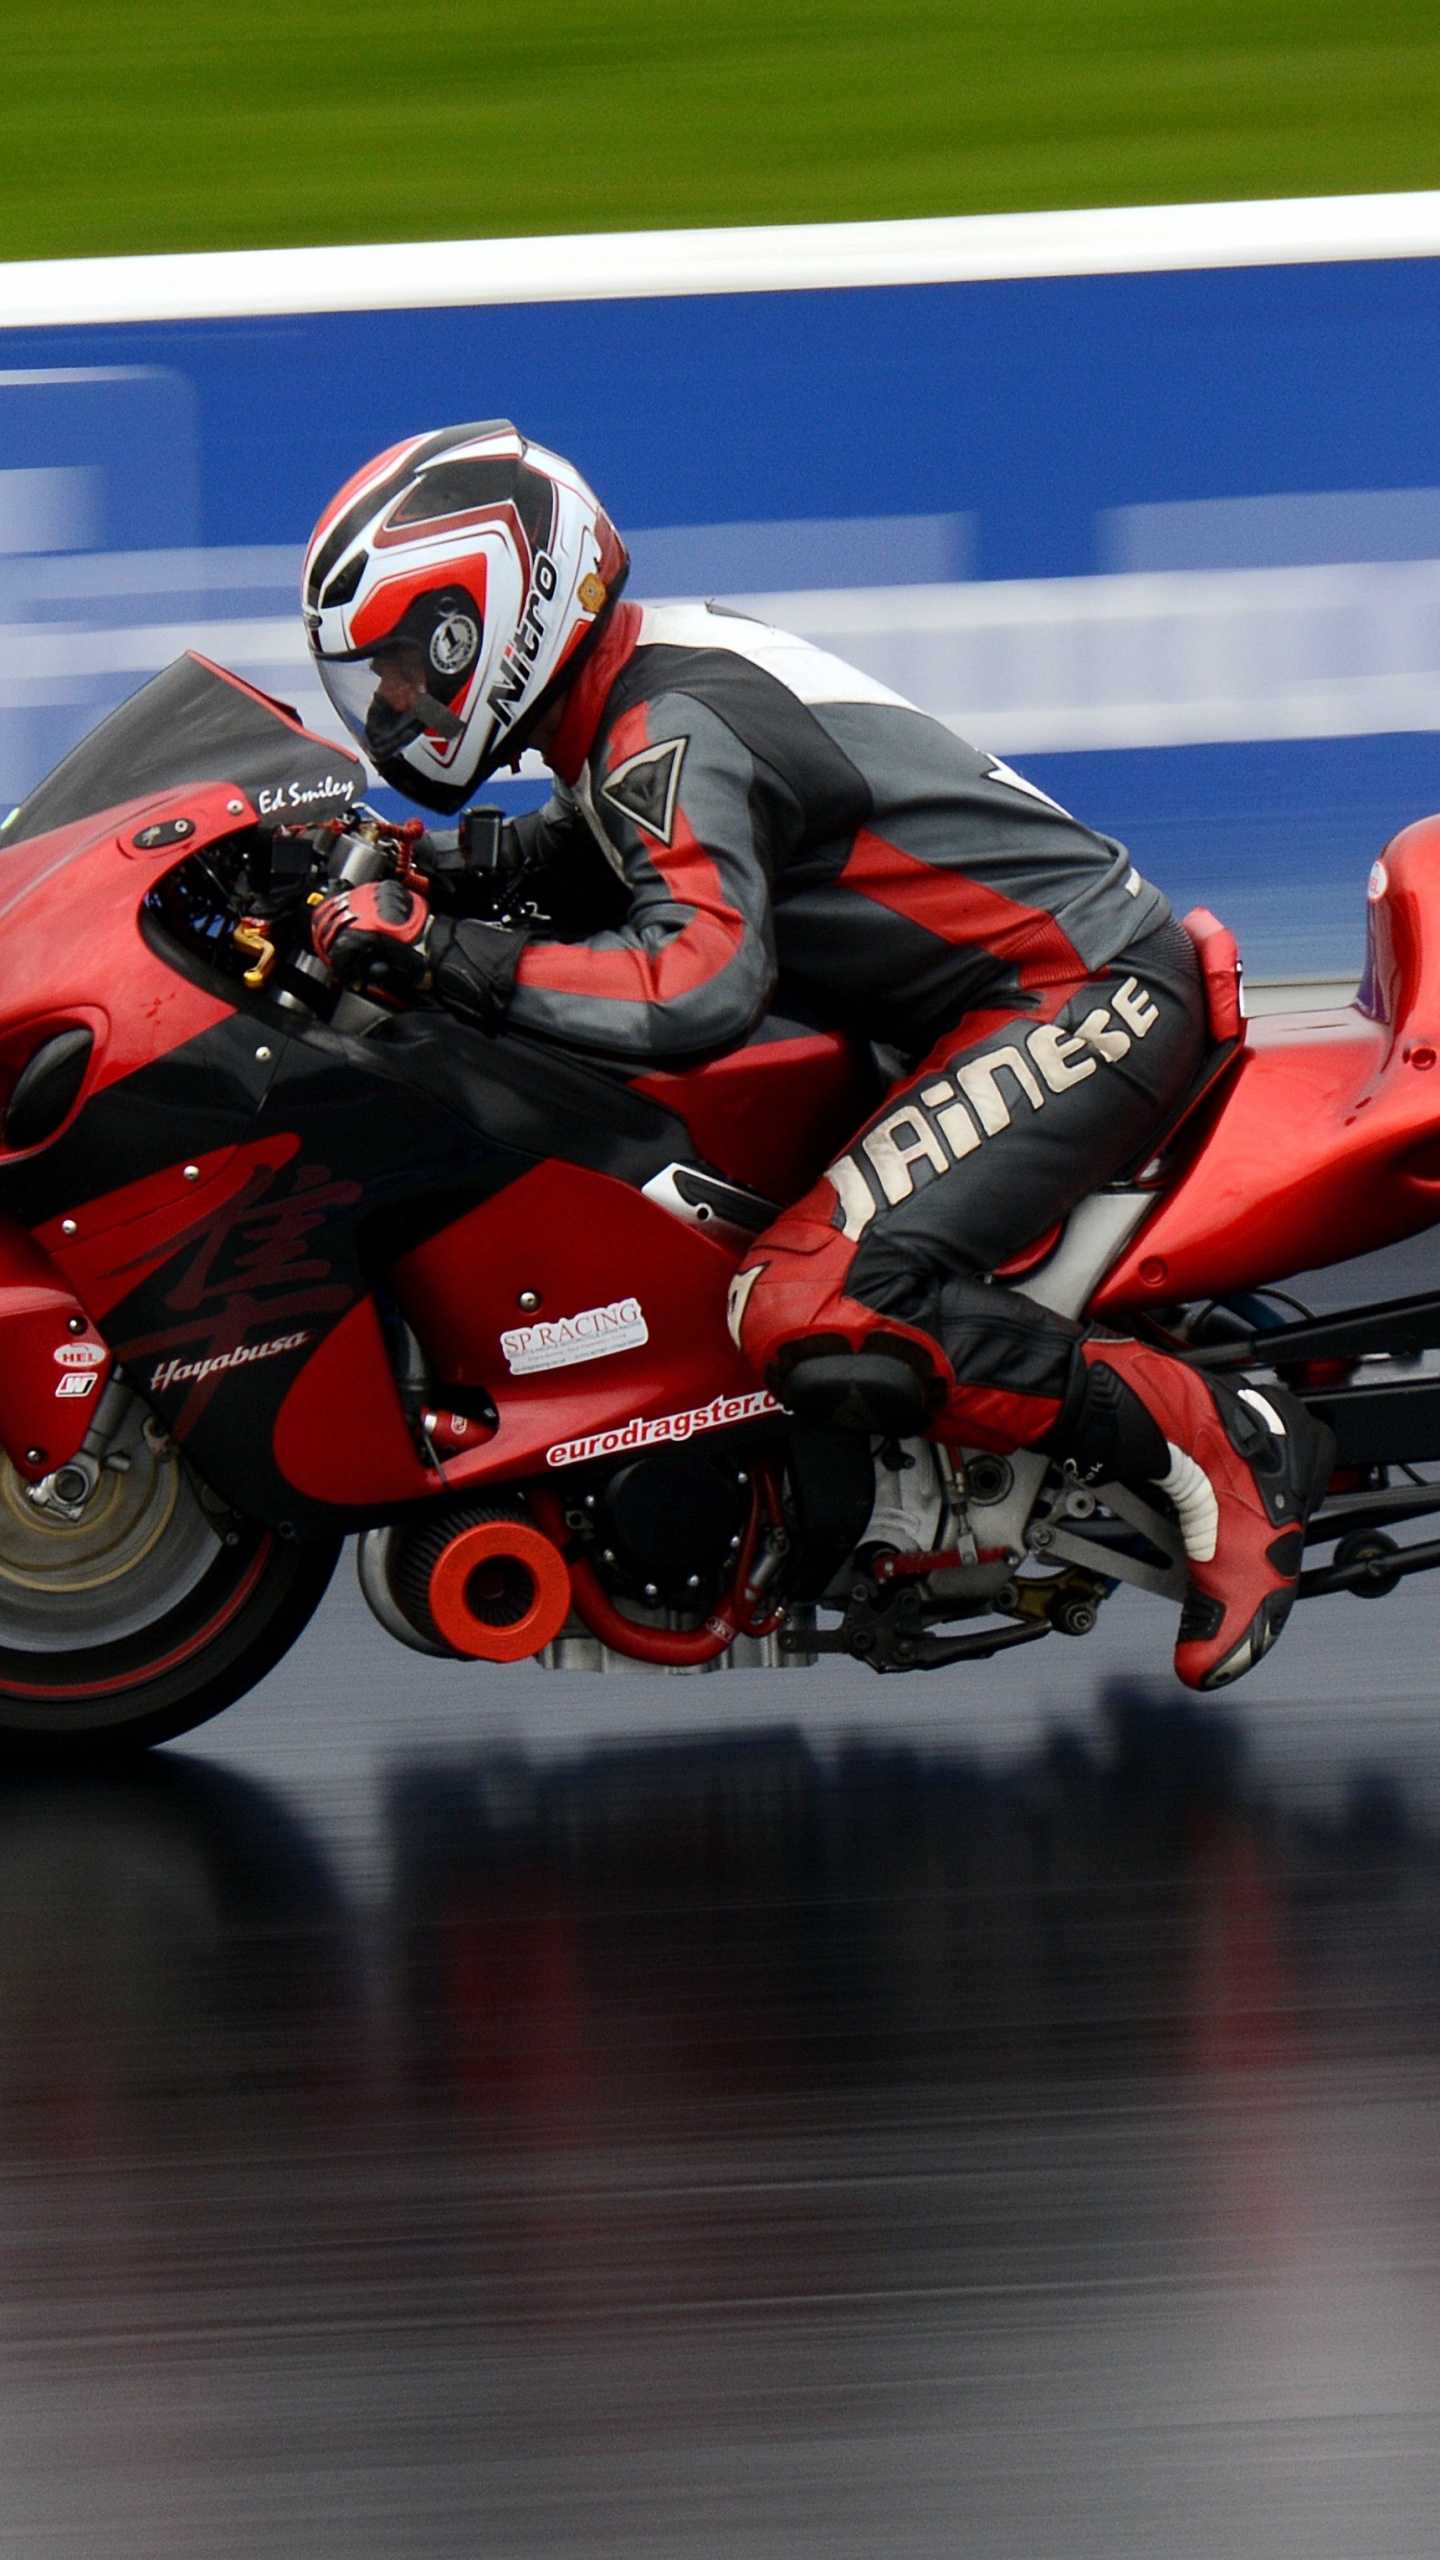 Man in Red and Black Motorcycle Helmet Riding Red Sports Bike. Wallpaper in 1440x2560 Resolution